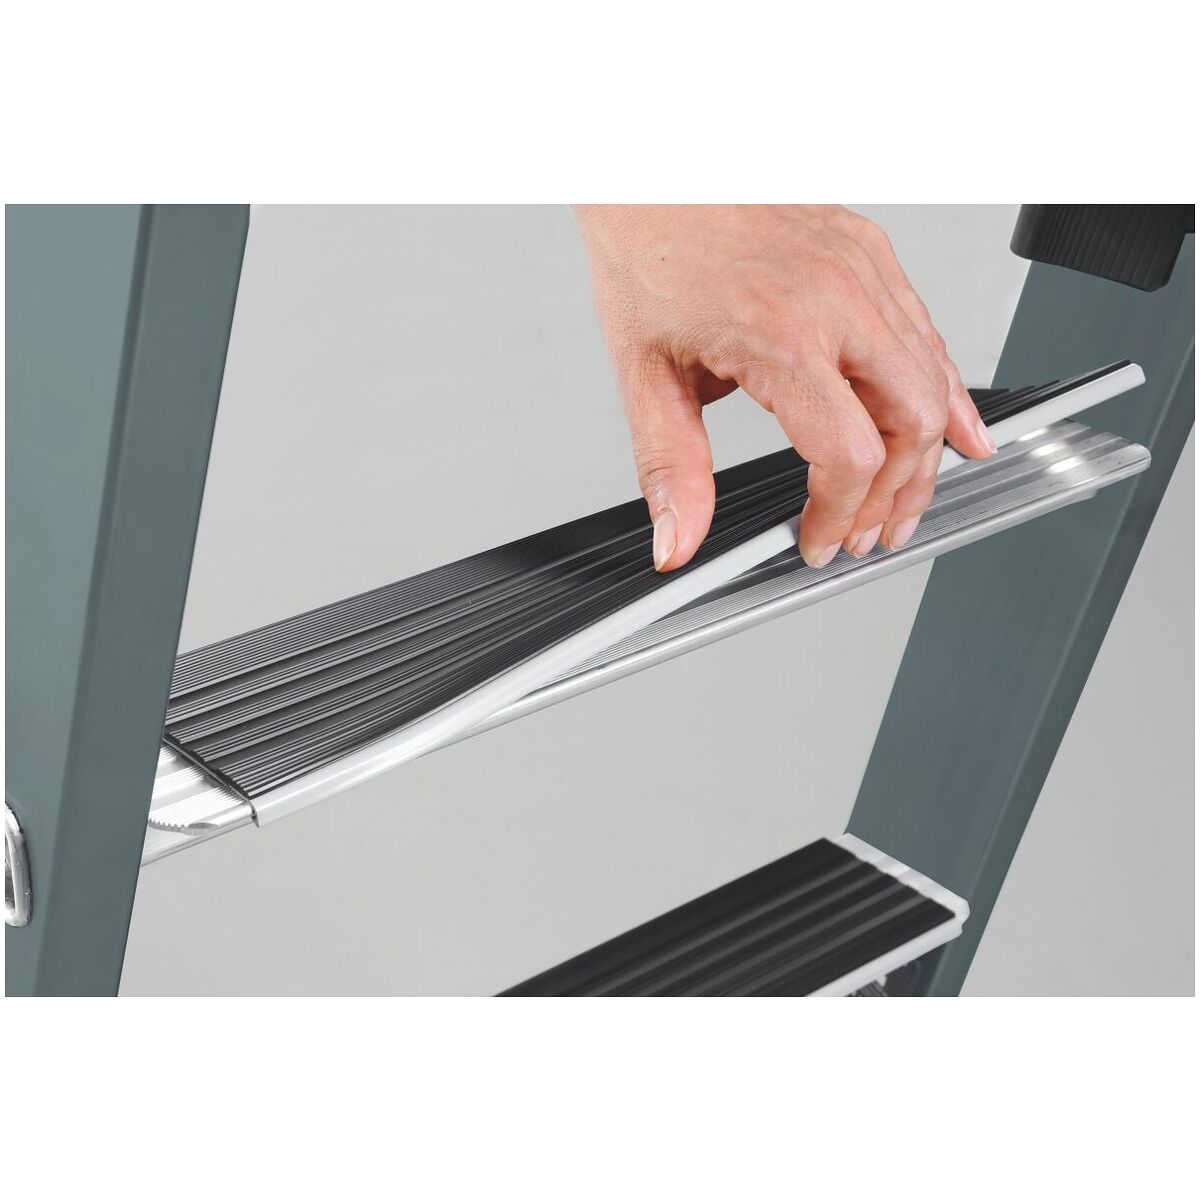 Stepladder, single-sided access with GripStep